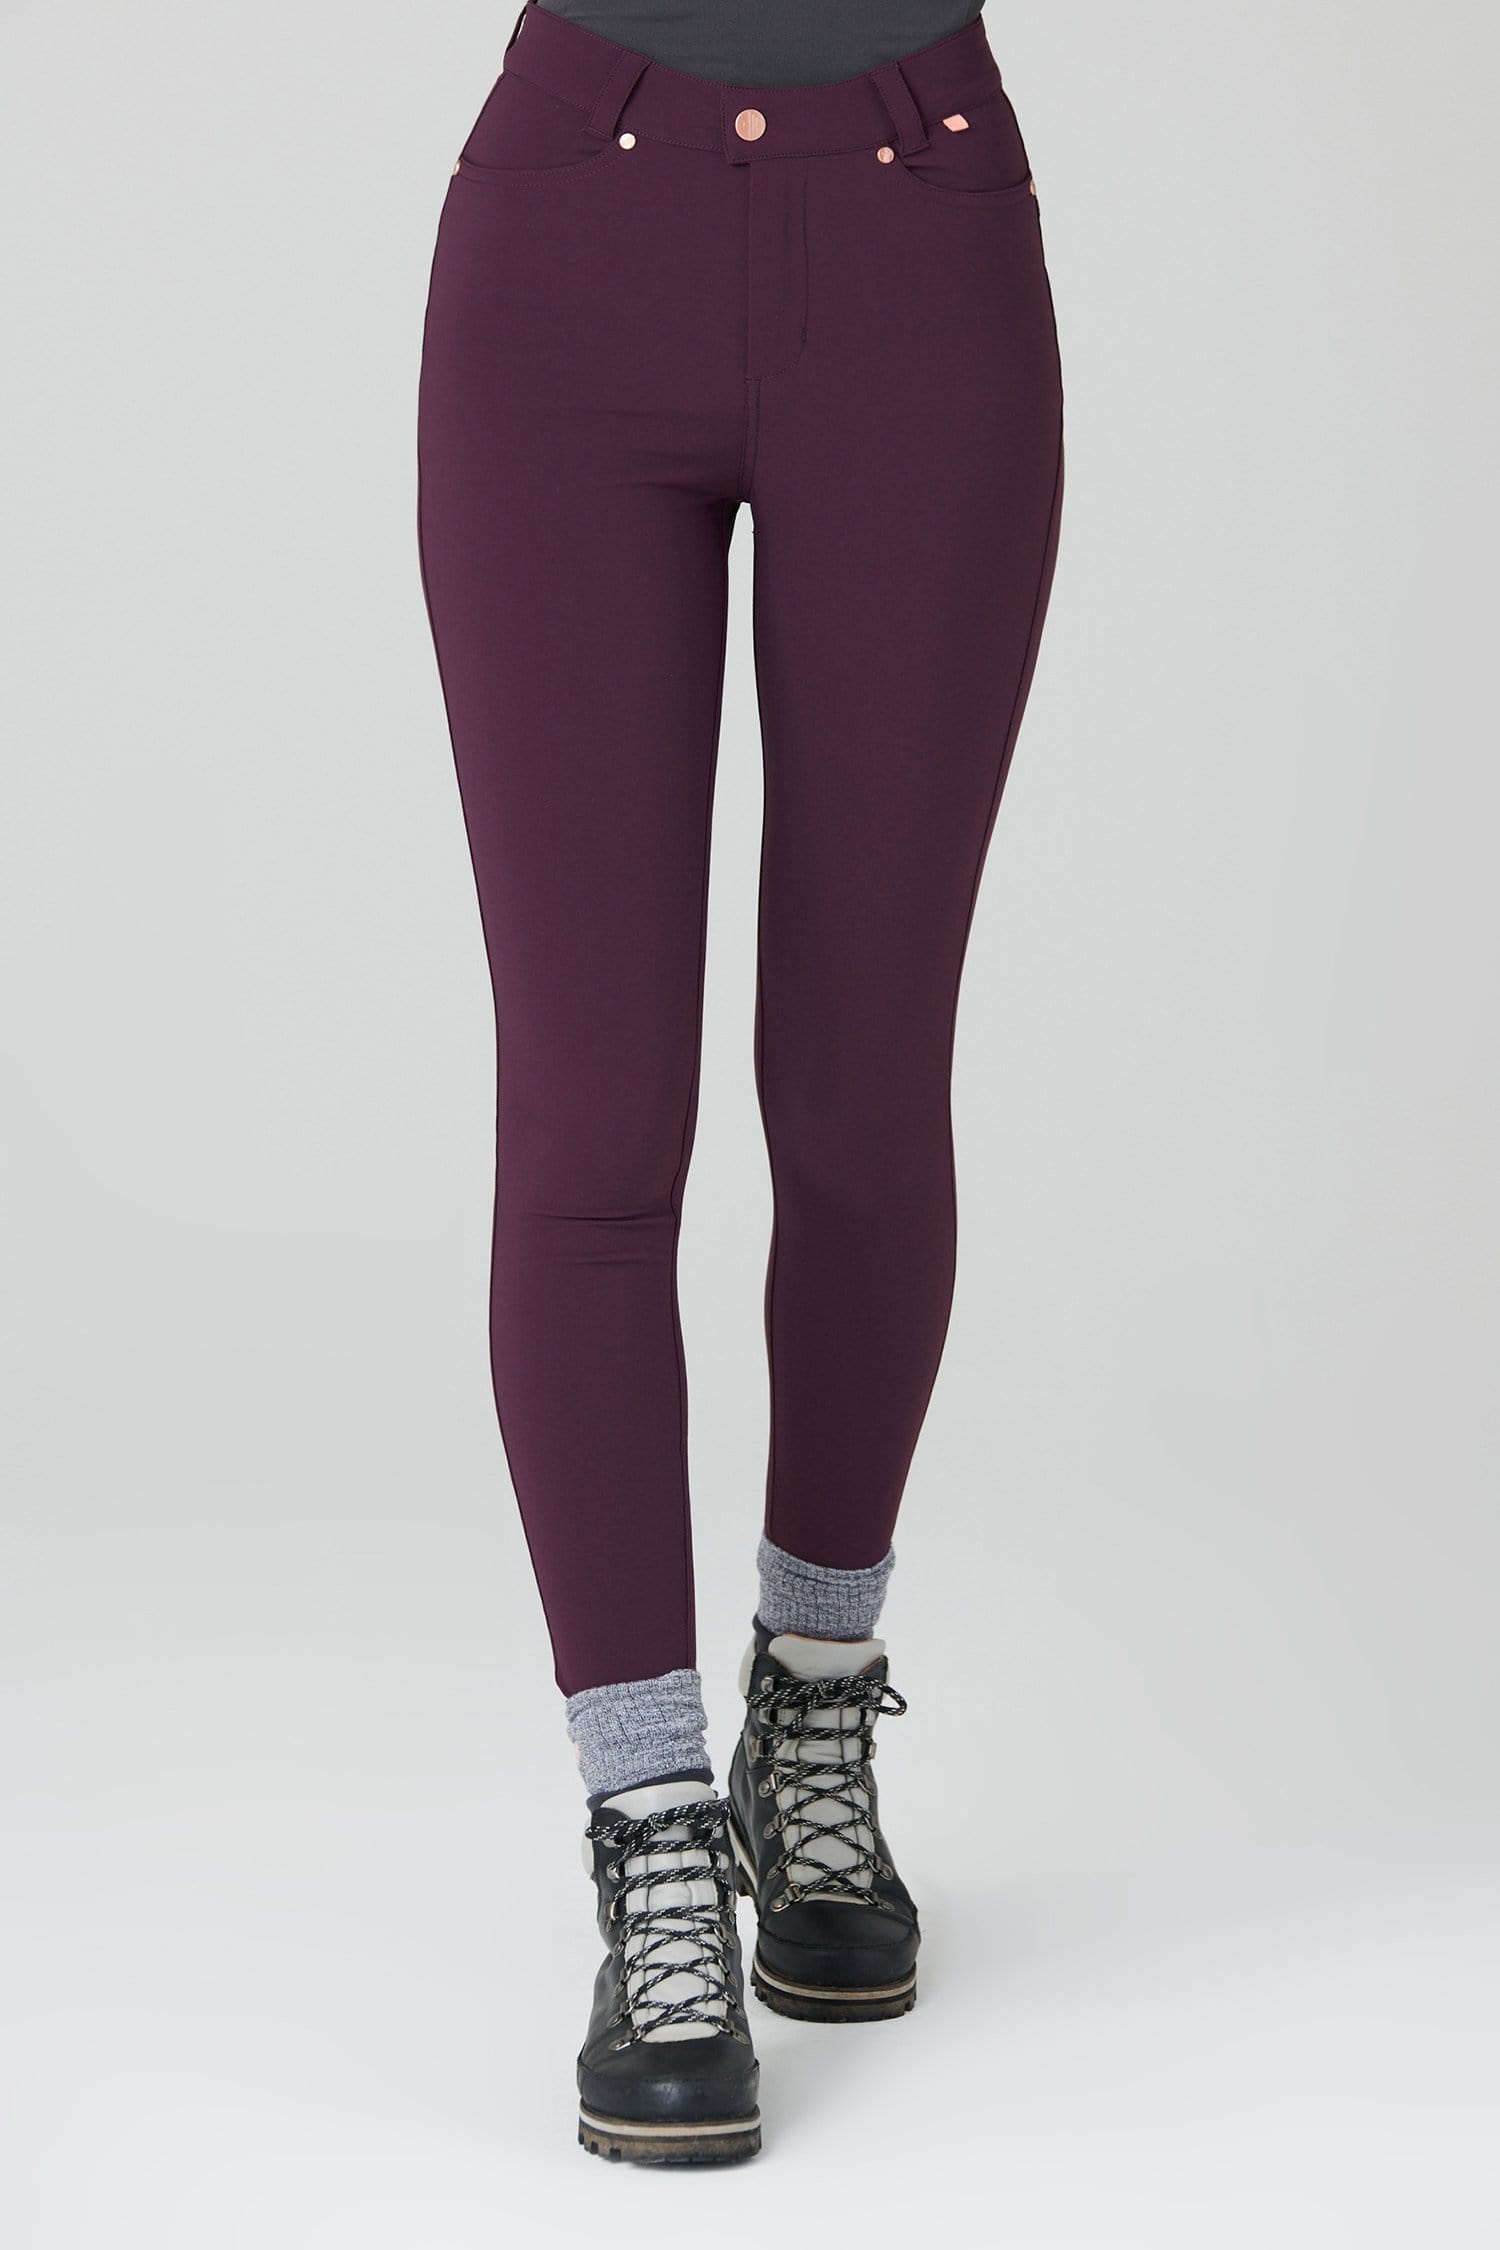 Max Stretch Skinny Outdoor Trousers - Aubergine - 30r / Uk12 - Womens - Acai Outdoorwear